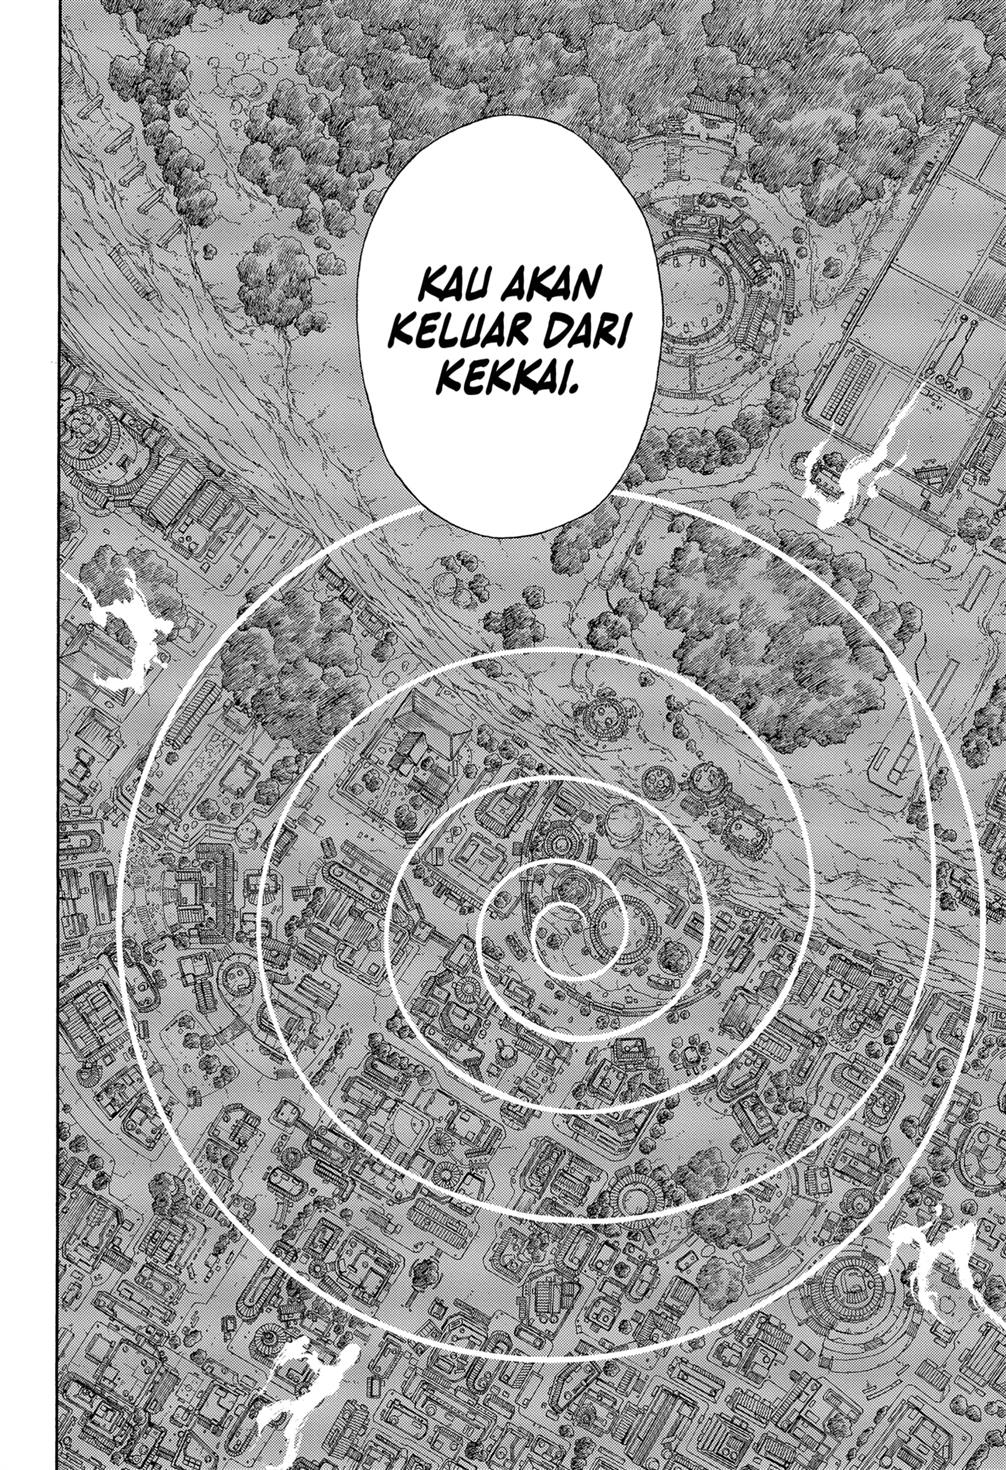 Naruto: The Whorl within the Spiral Chapter 00